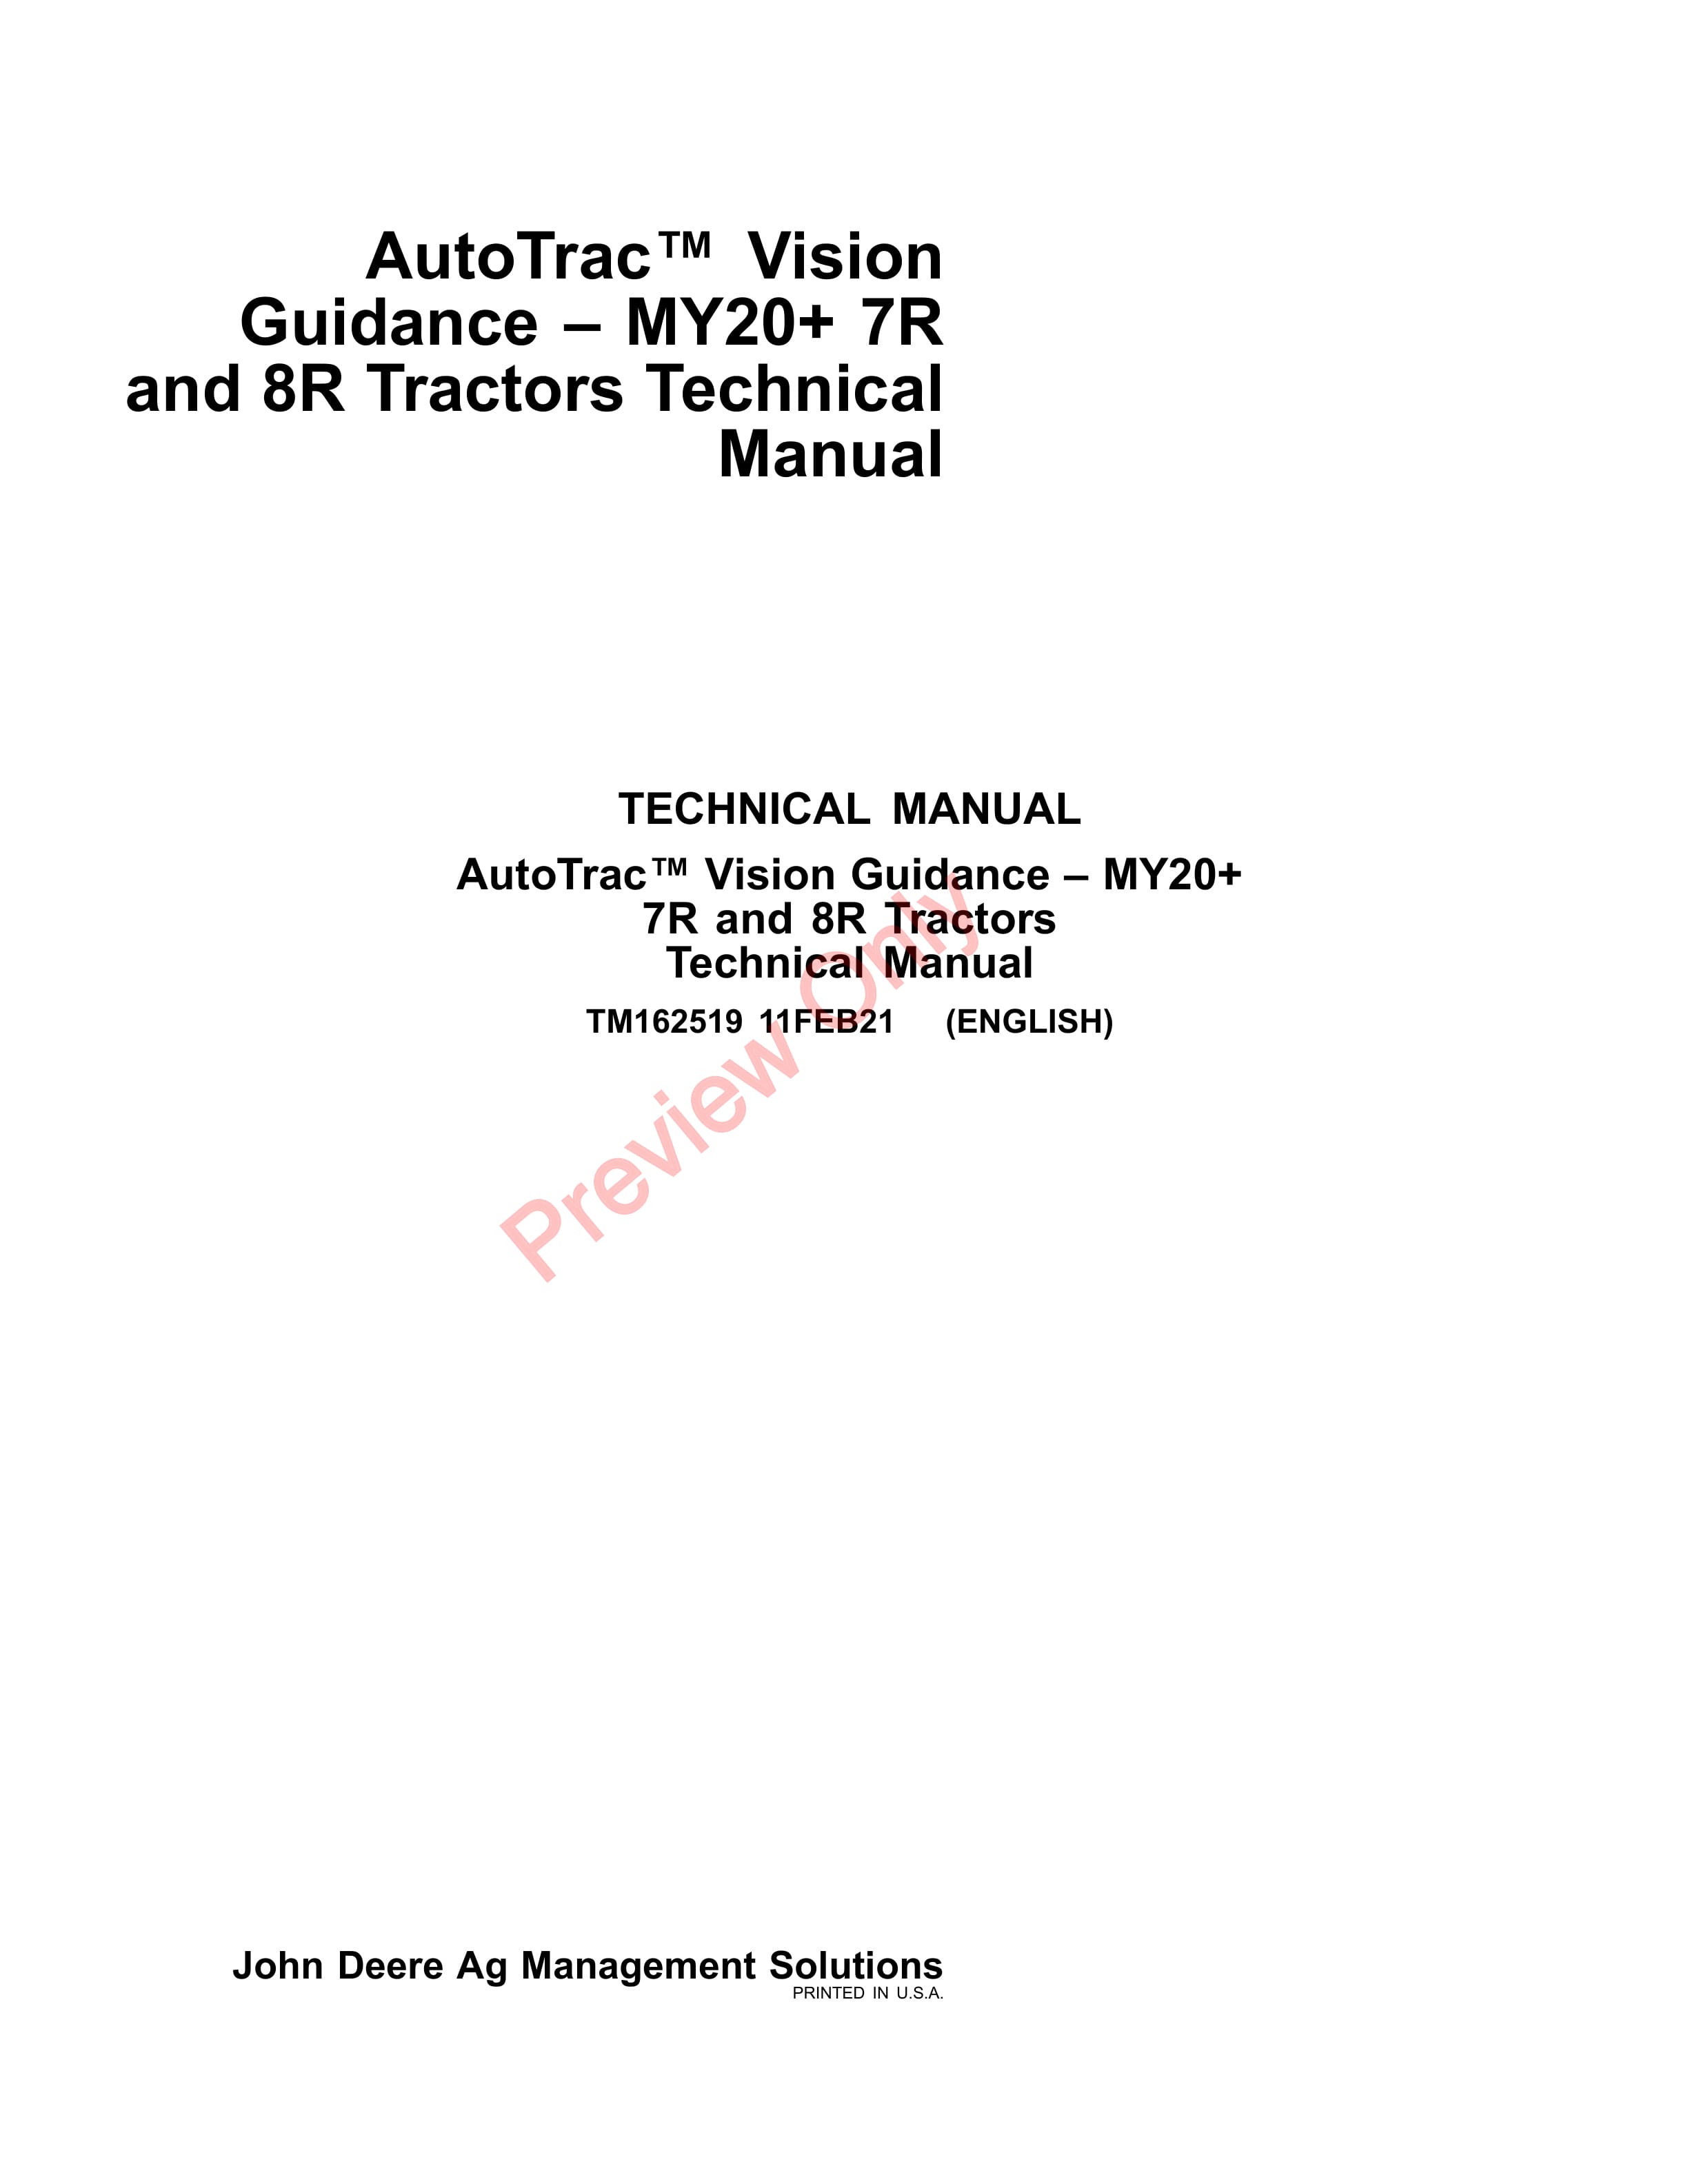 John Deere AutoTrac Vision Guidance 7R and 8R Tractors MY20 Technical Manual TM162519 11FEB21 1